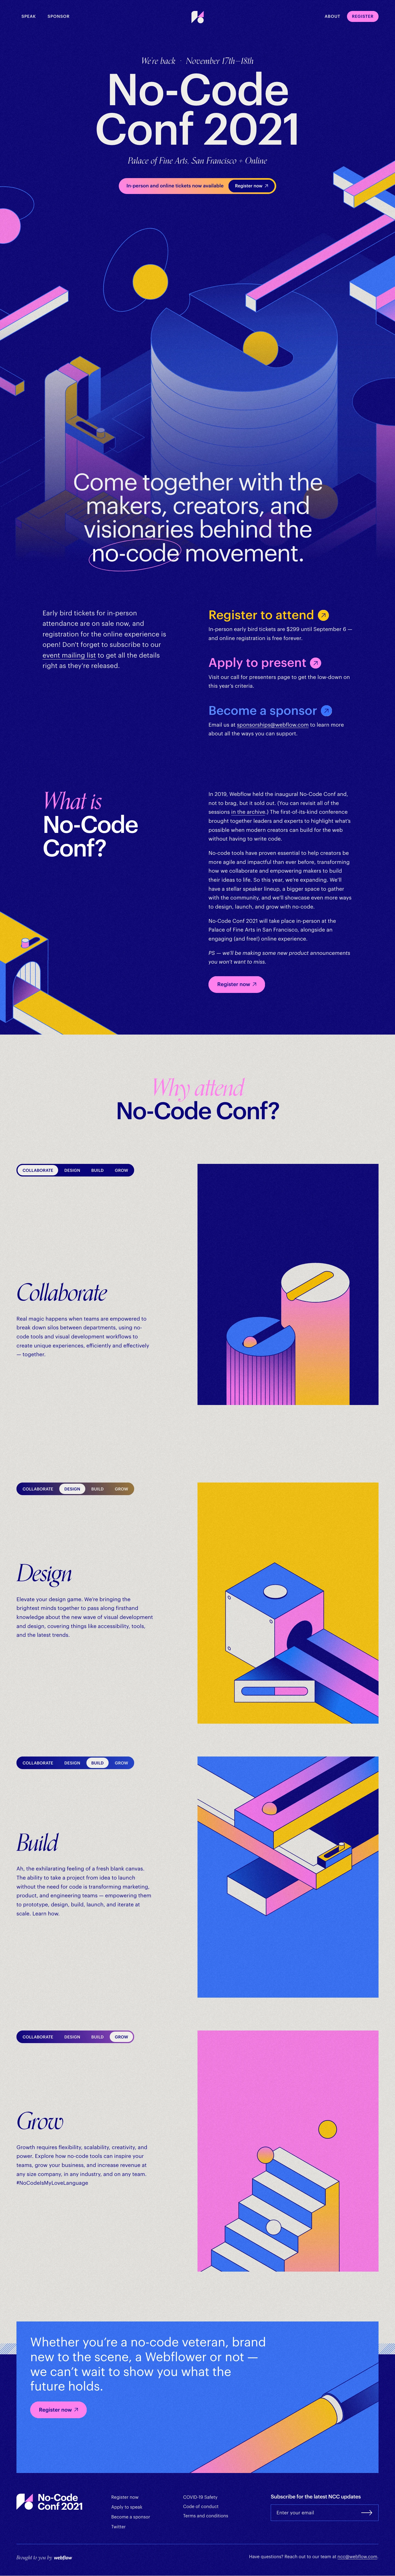 No-Code Conference 2021 Landing Page Example: Webflow’s annual No-Code Conf is back! Join us November 17–18, 2021 to reunite with the makers, creators, and visionaries who are shaping the future of the web.